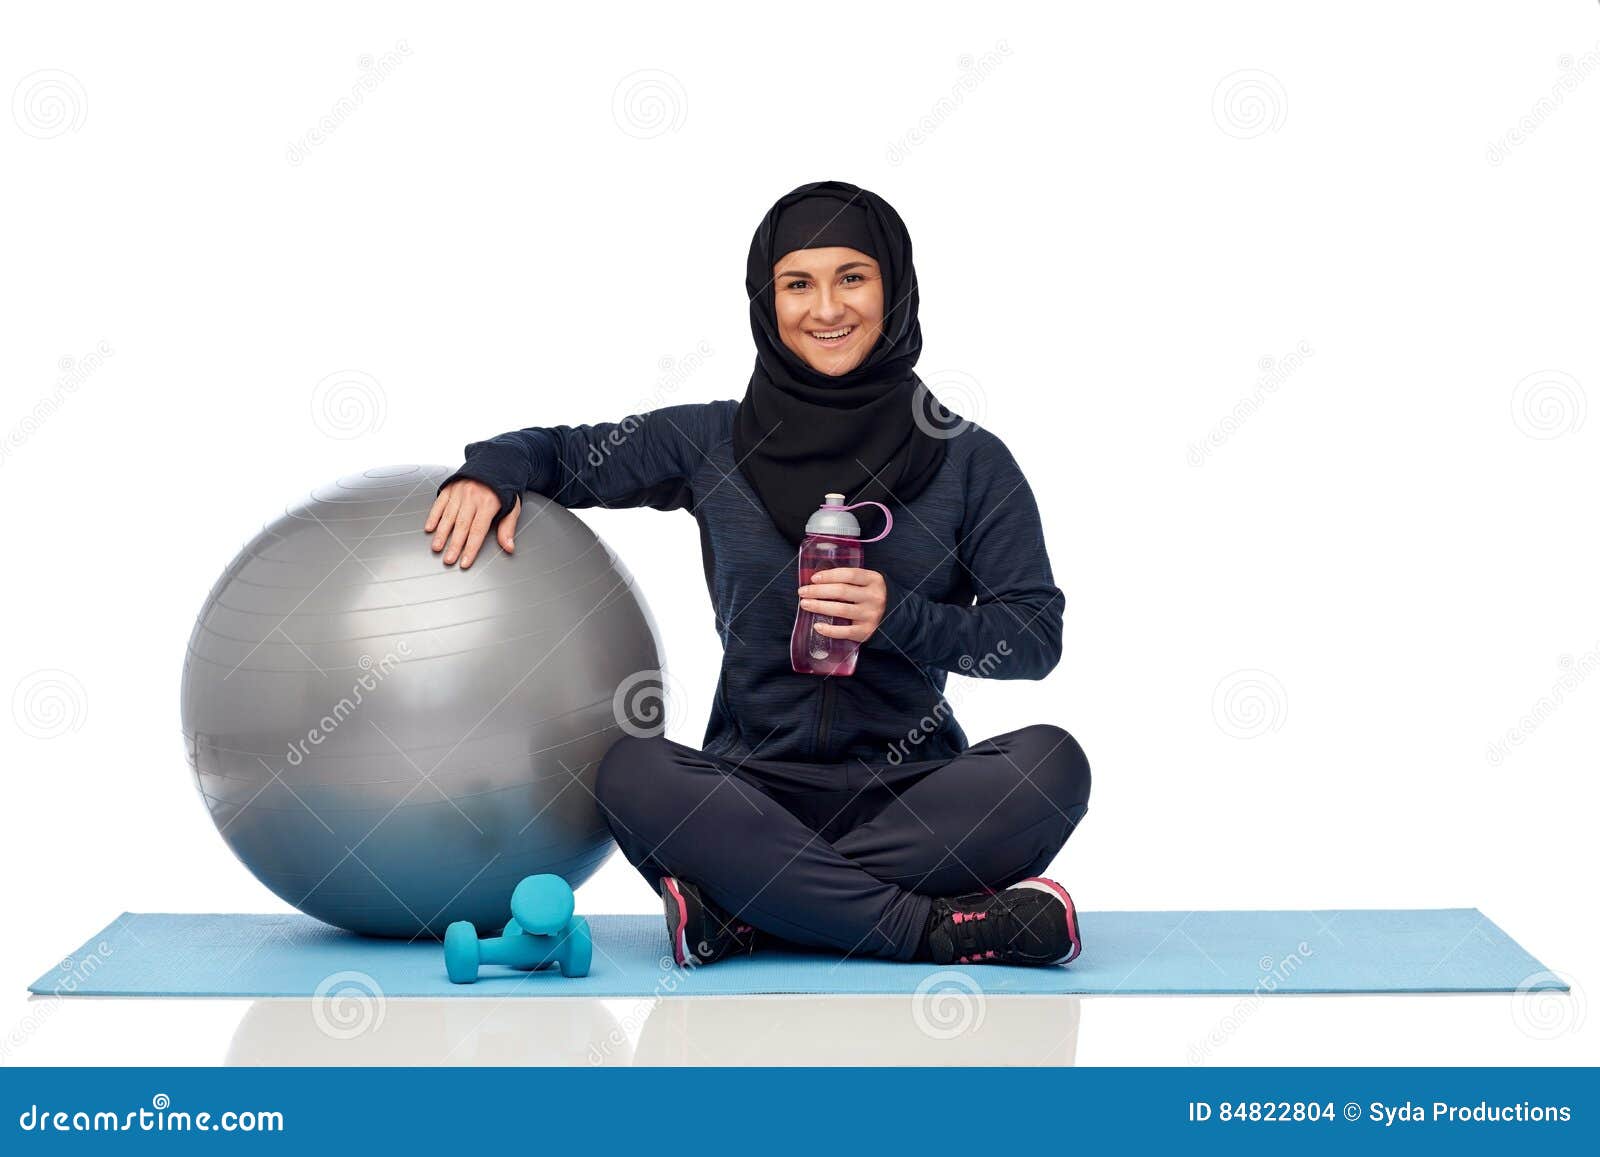 muslim woman in hijab with fitness ball and bottle